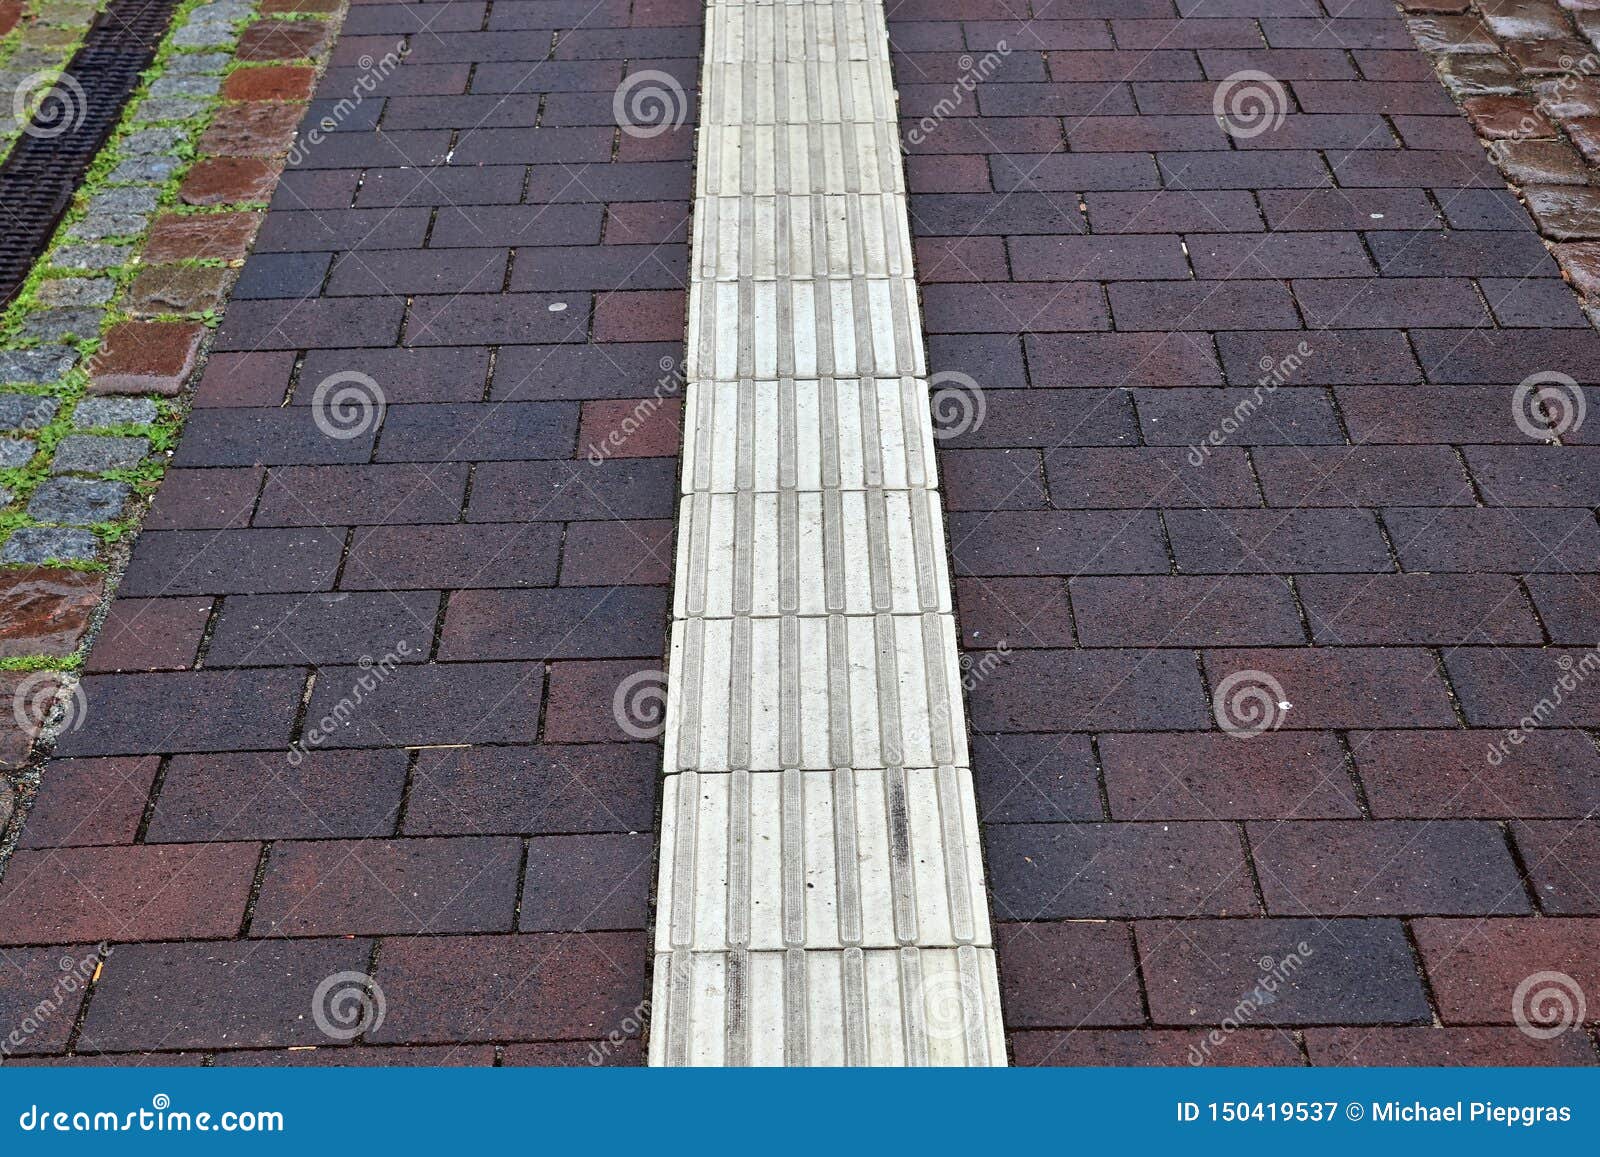 Detailed Close Up View on Cobblestone Pavement Streets in High ...